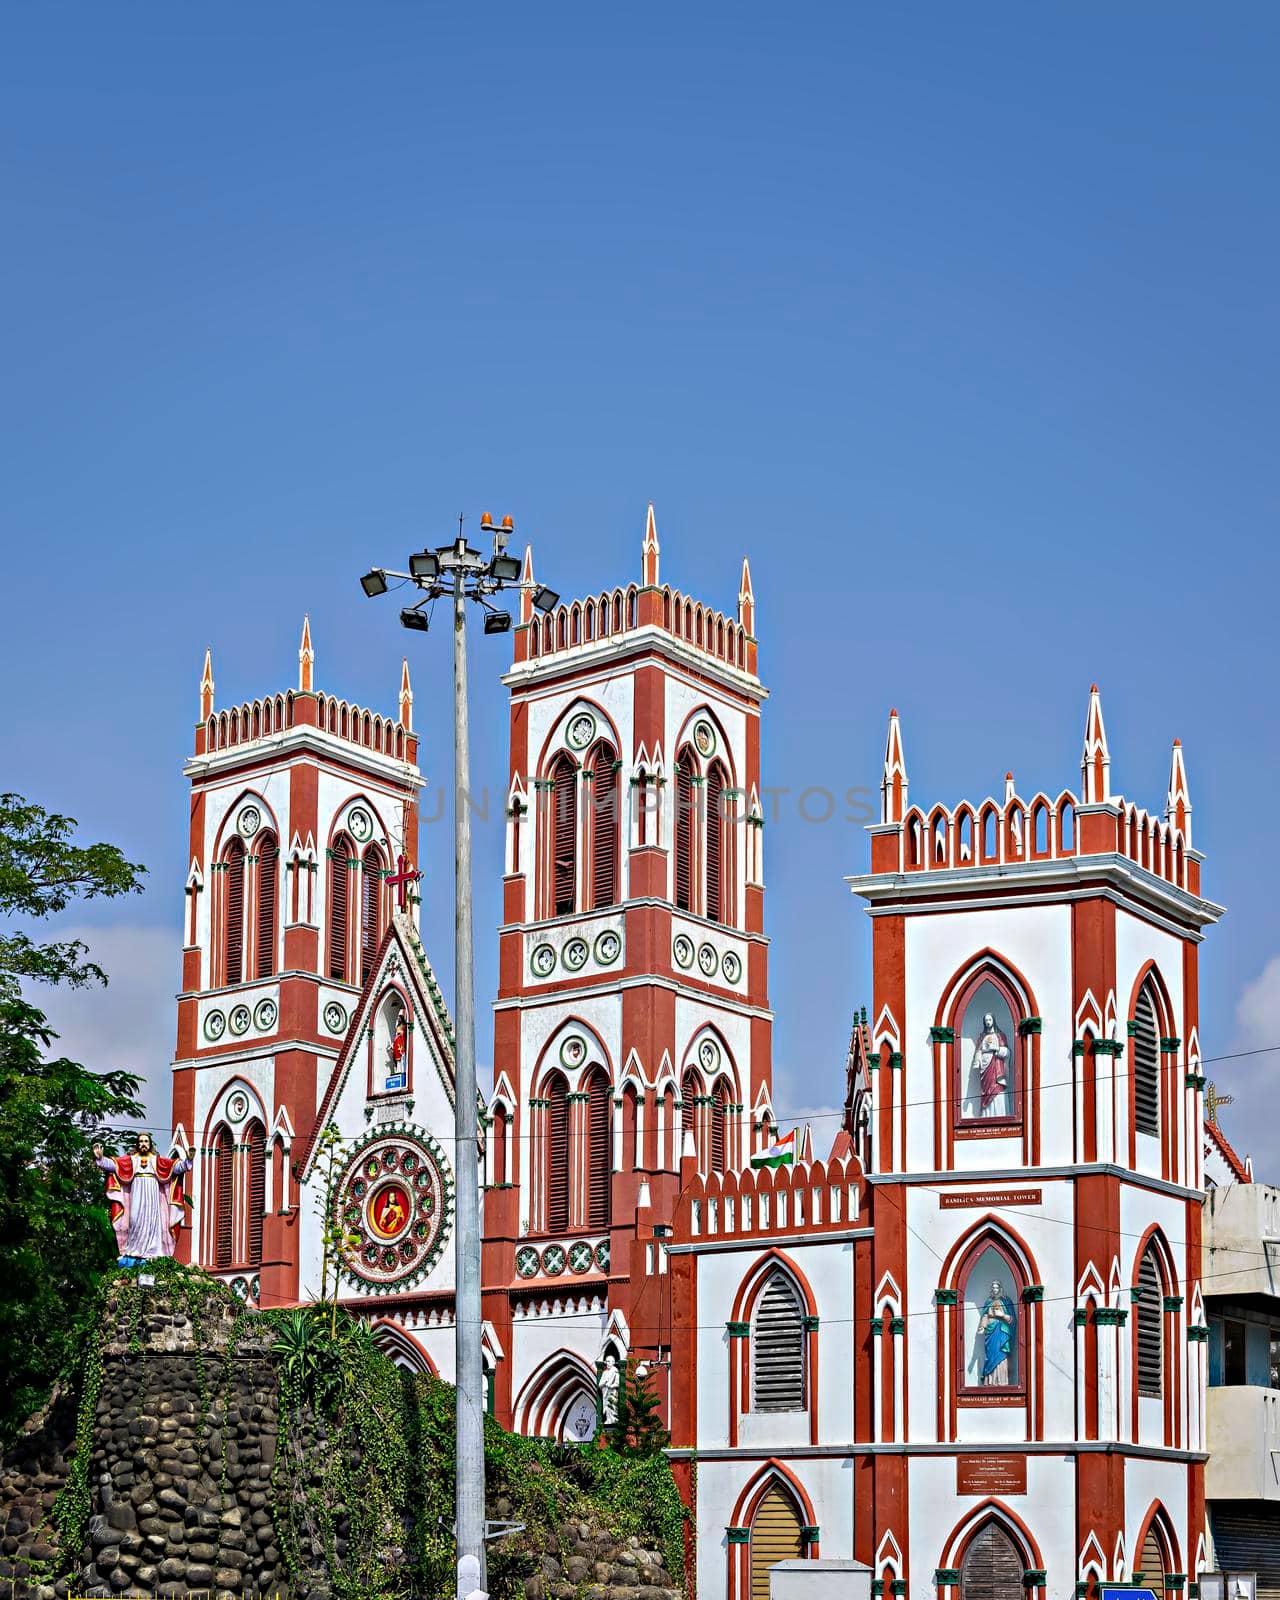 Basilica of the Sacred Heart of Jesus church situated on the south boulevard of Pondicherry, India, is an specimen of Gothic architecture. by lalam